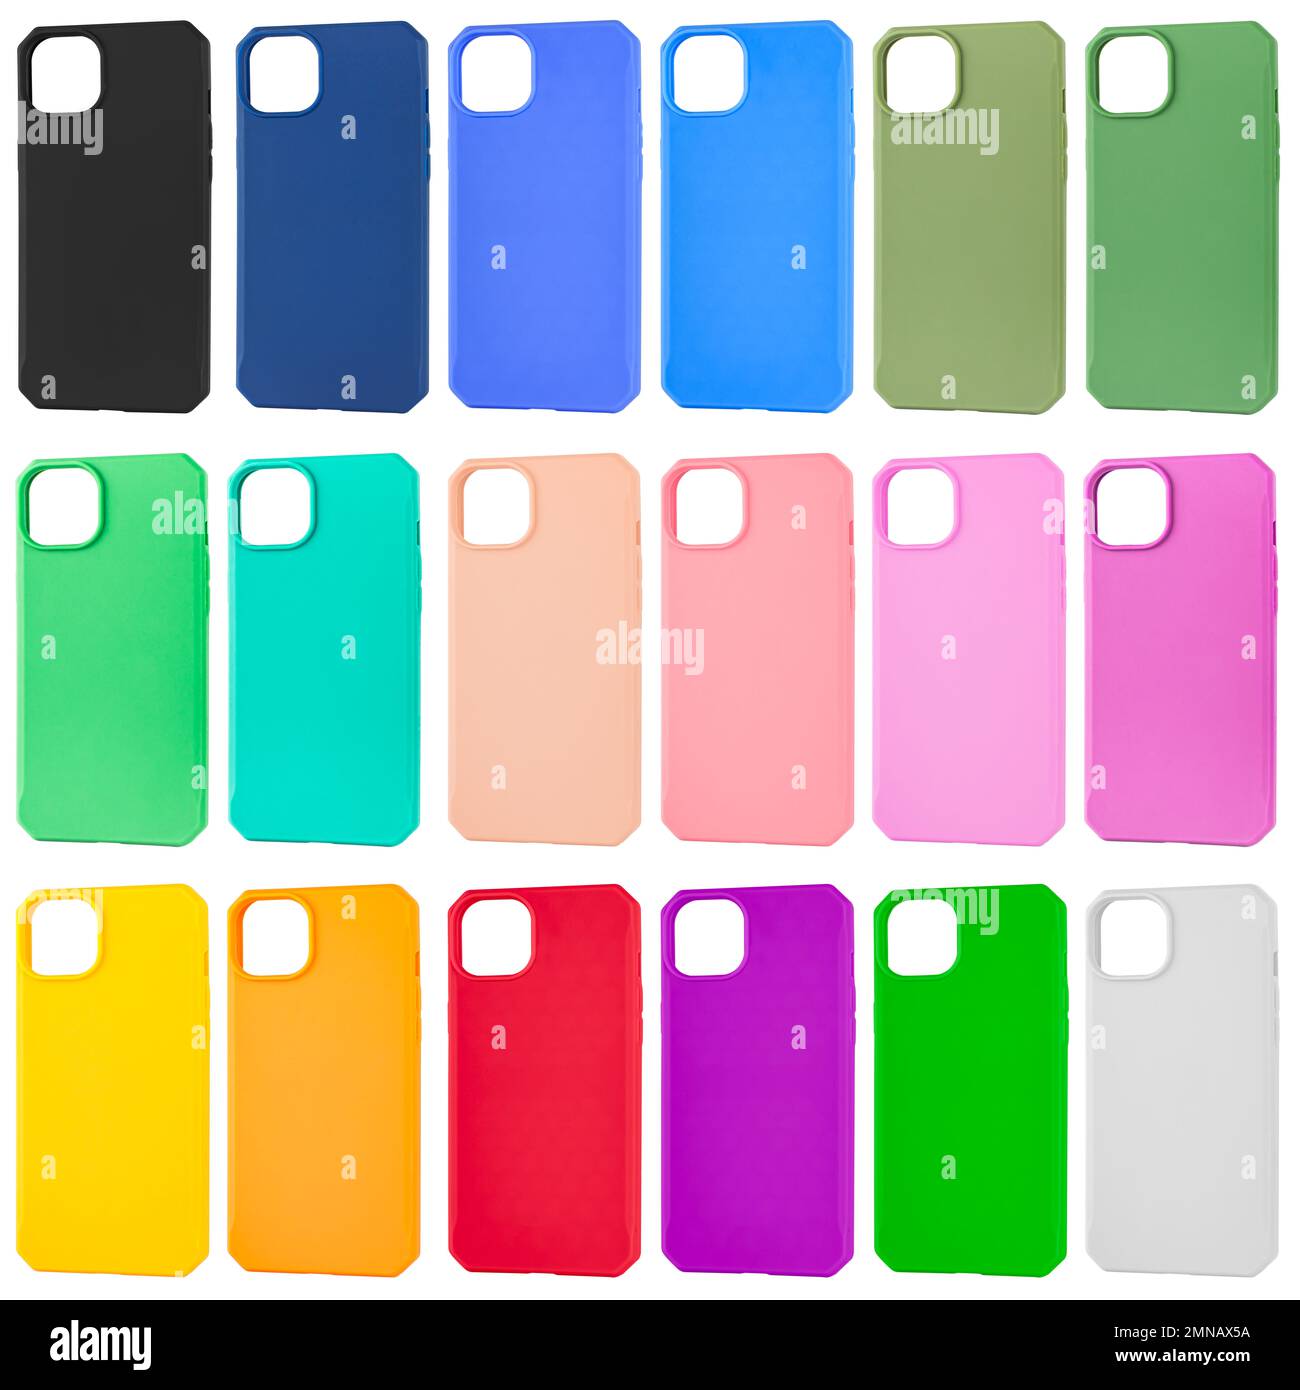 silicone cases for the phone, on a white background in isolation collage Stock Photo